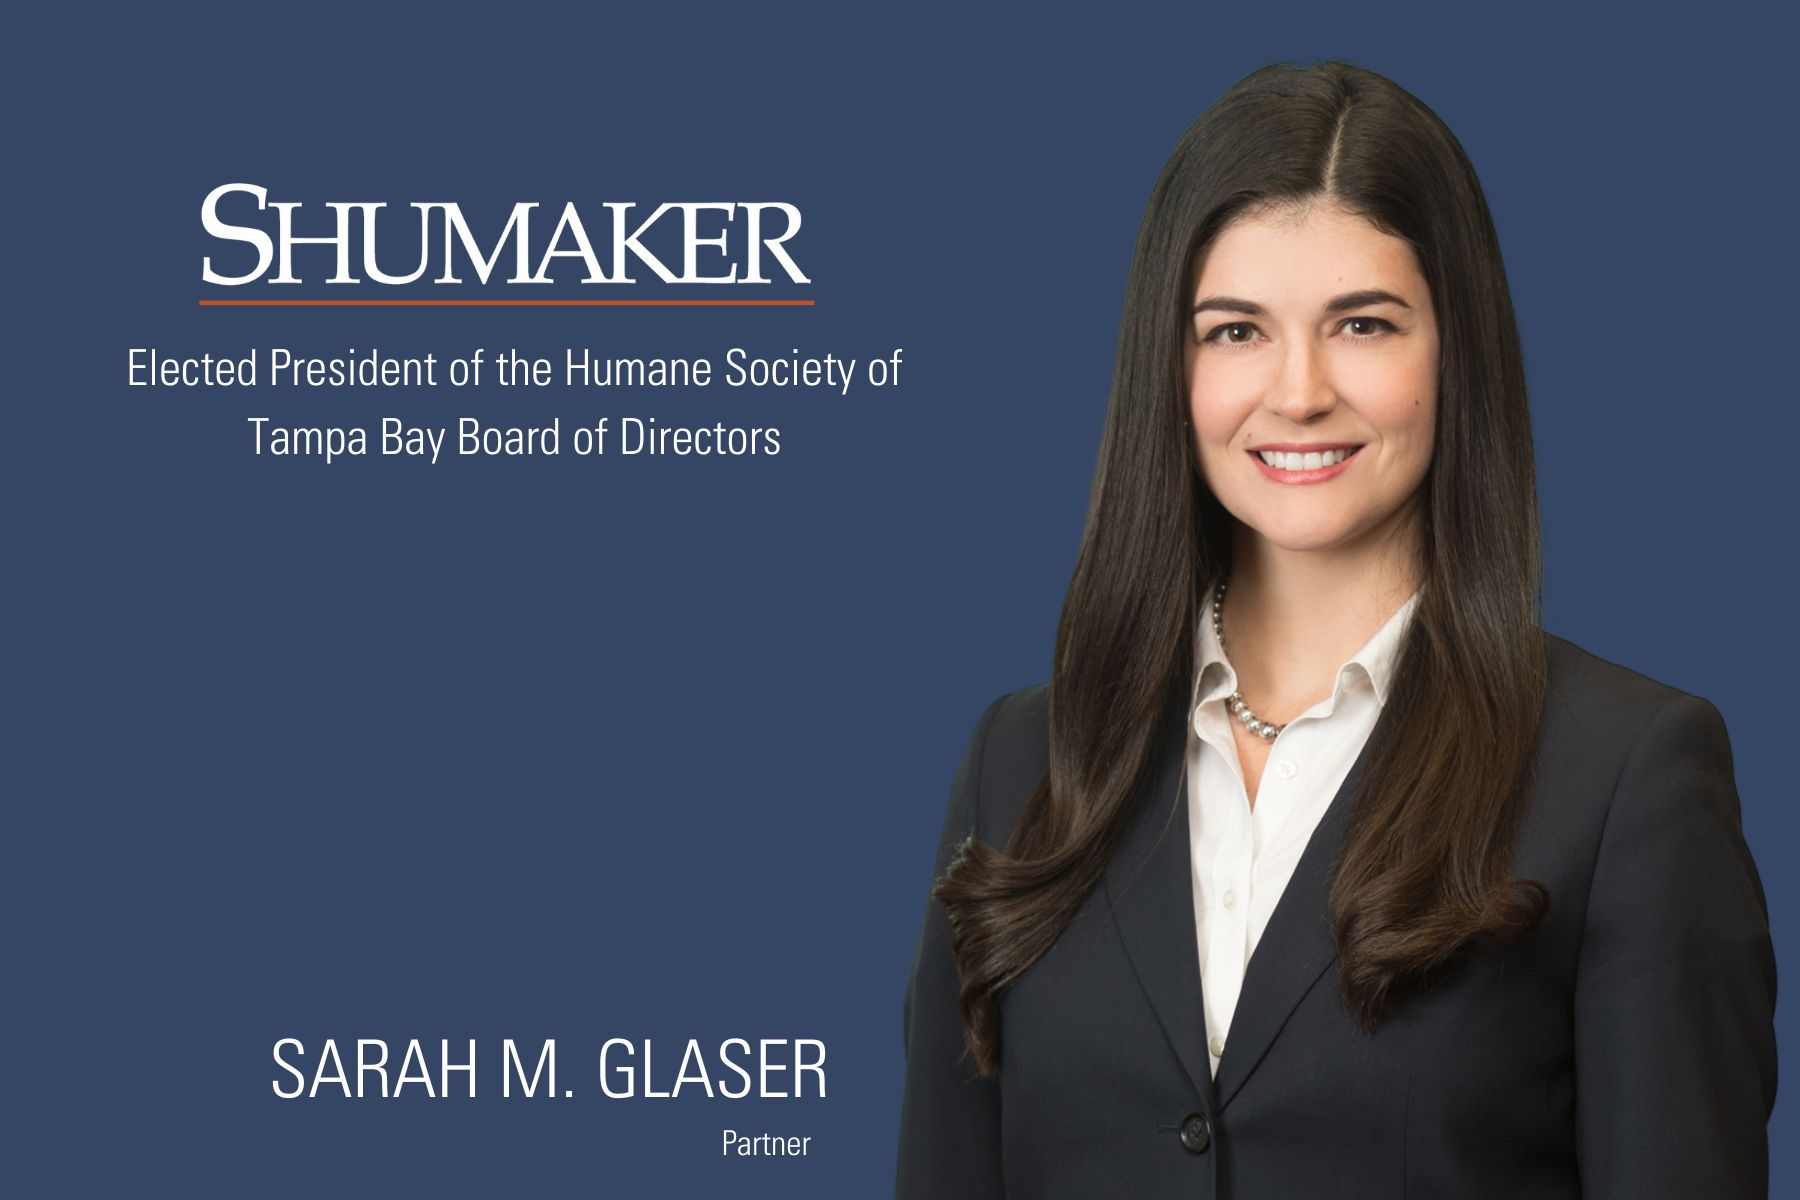 Sarah M. Glaser Elected President of the Humane Society of Tampa Bay Board of Directors